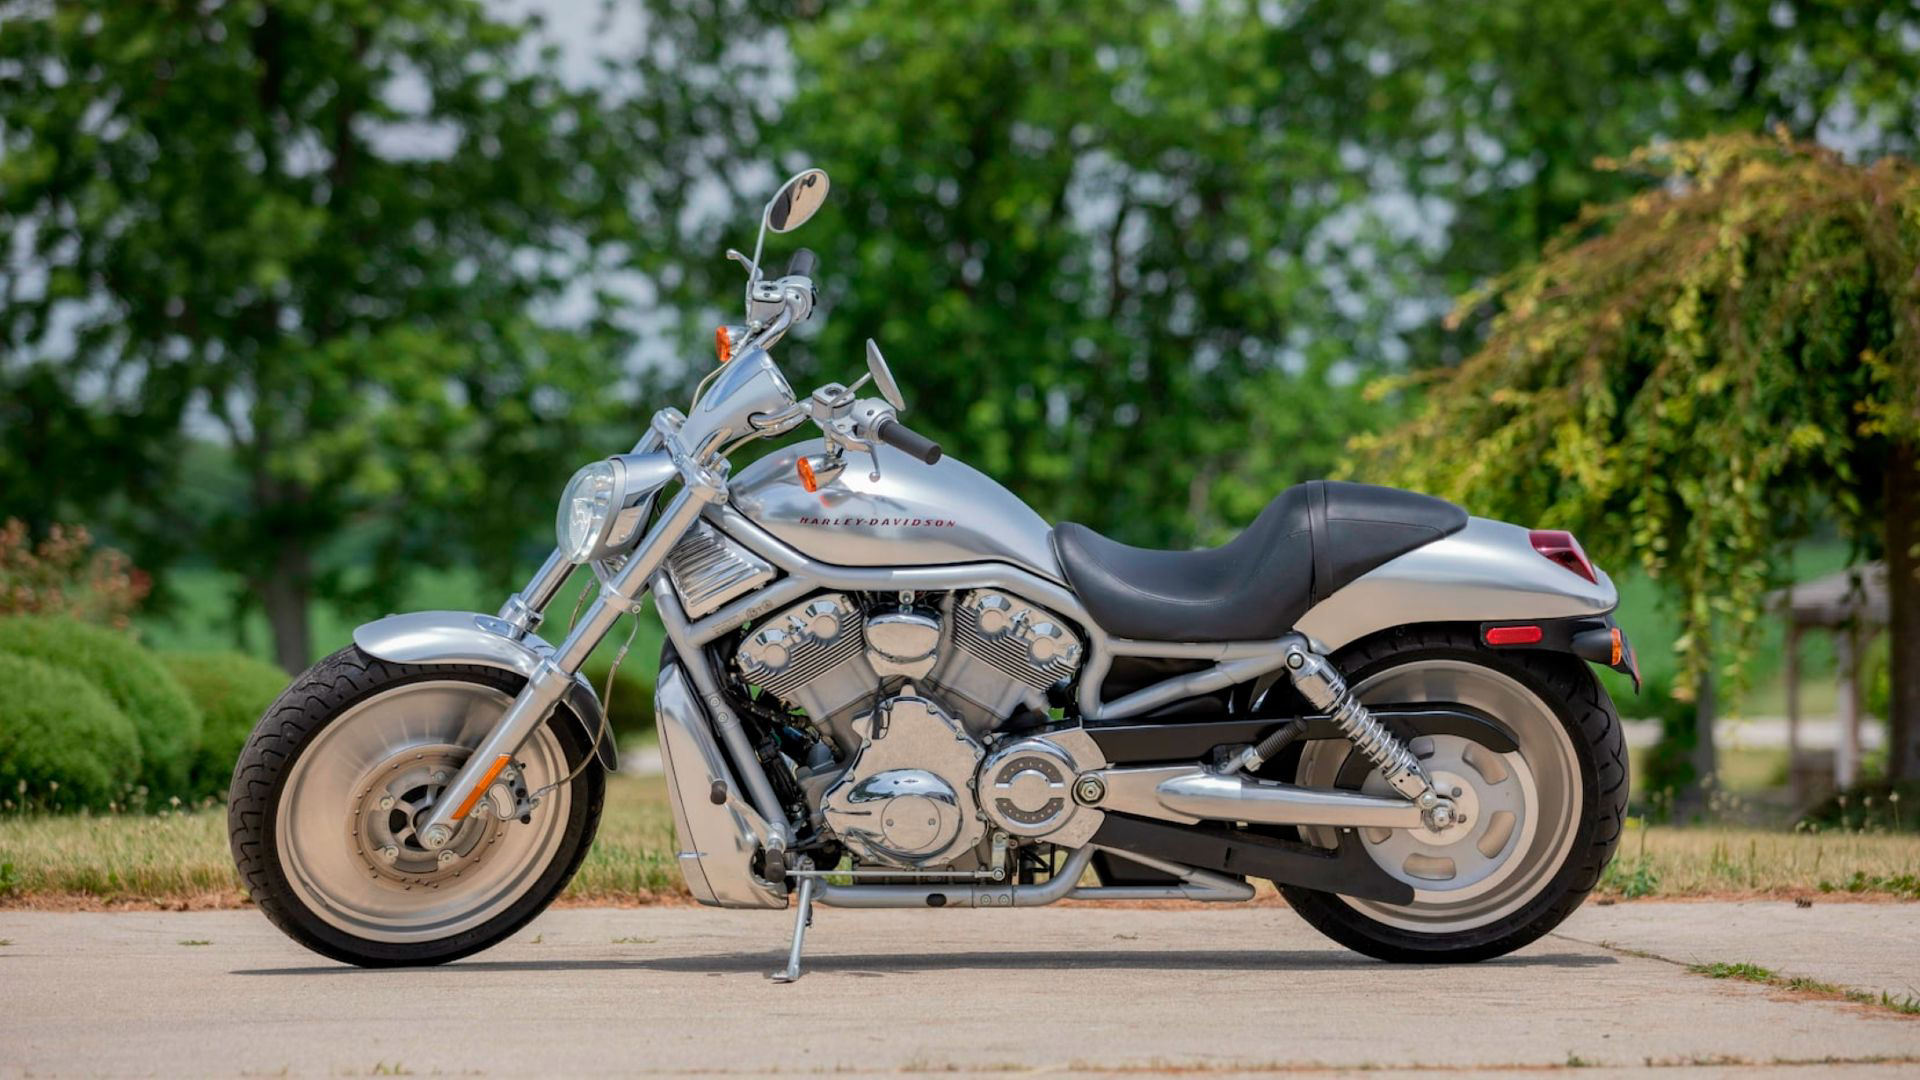 Discontinued HarleyDavidson Models That Need To Be Revived